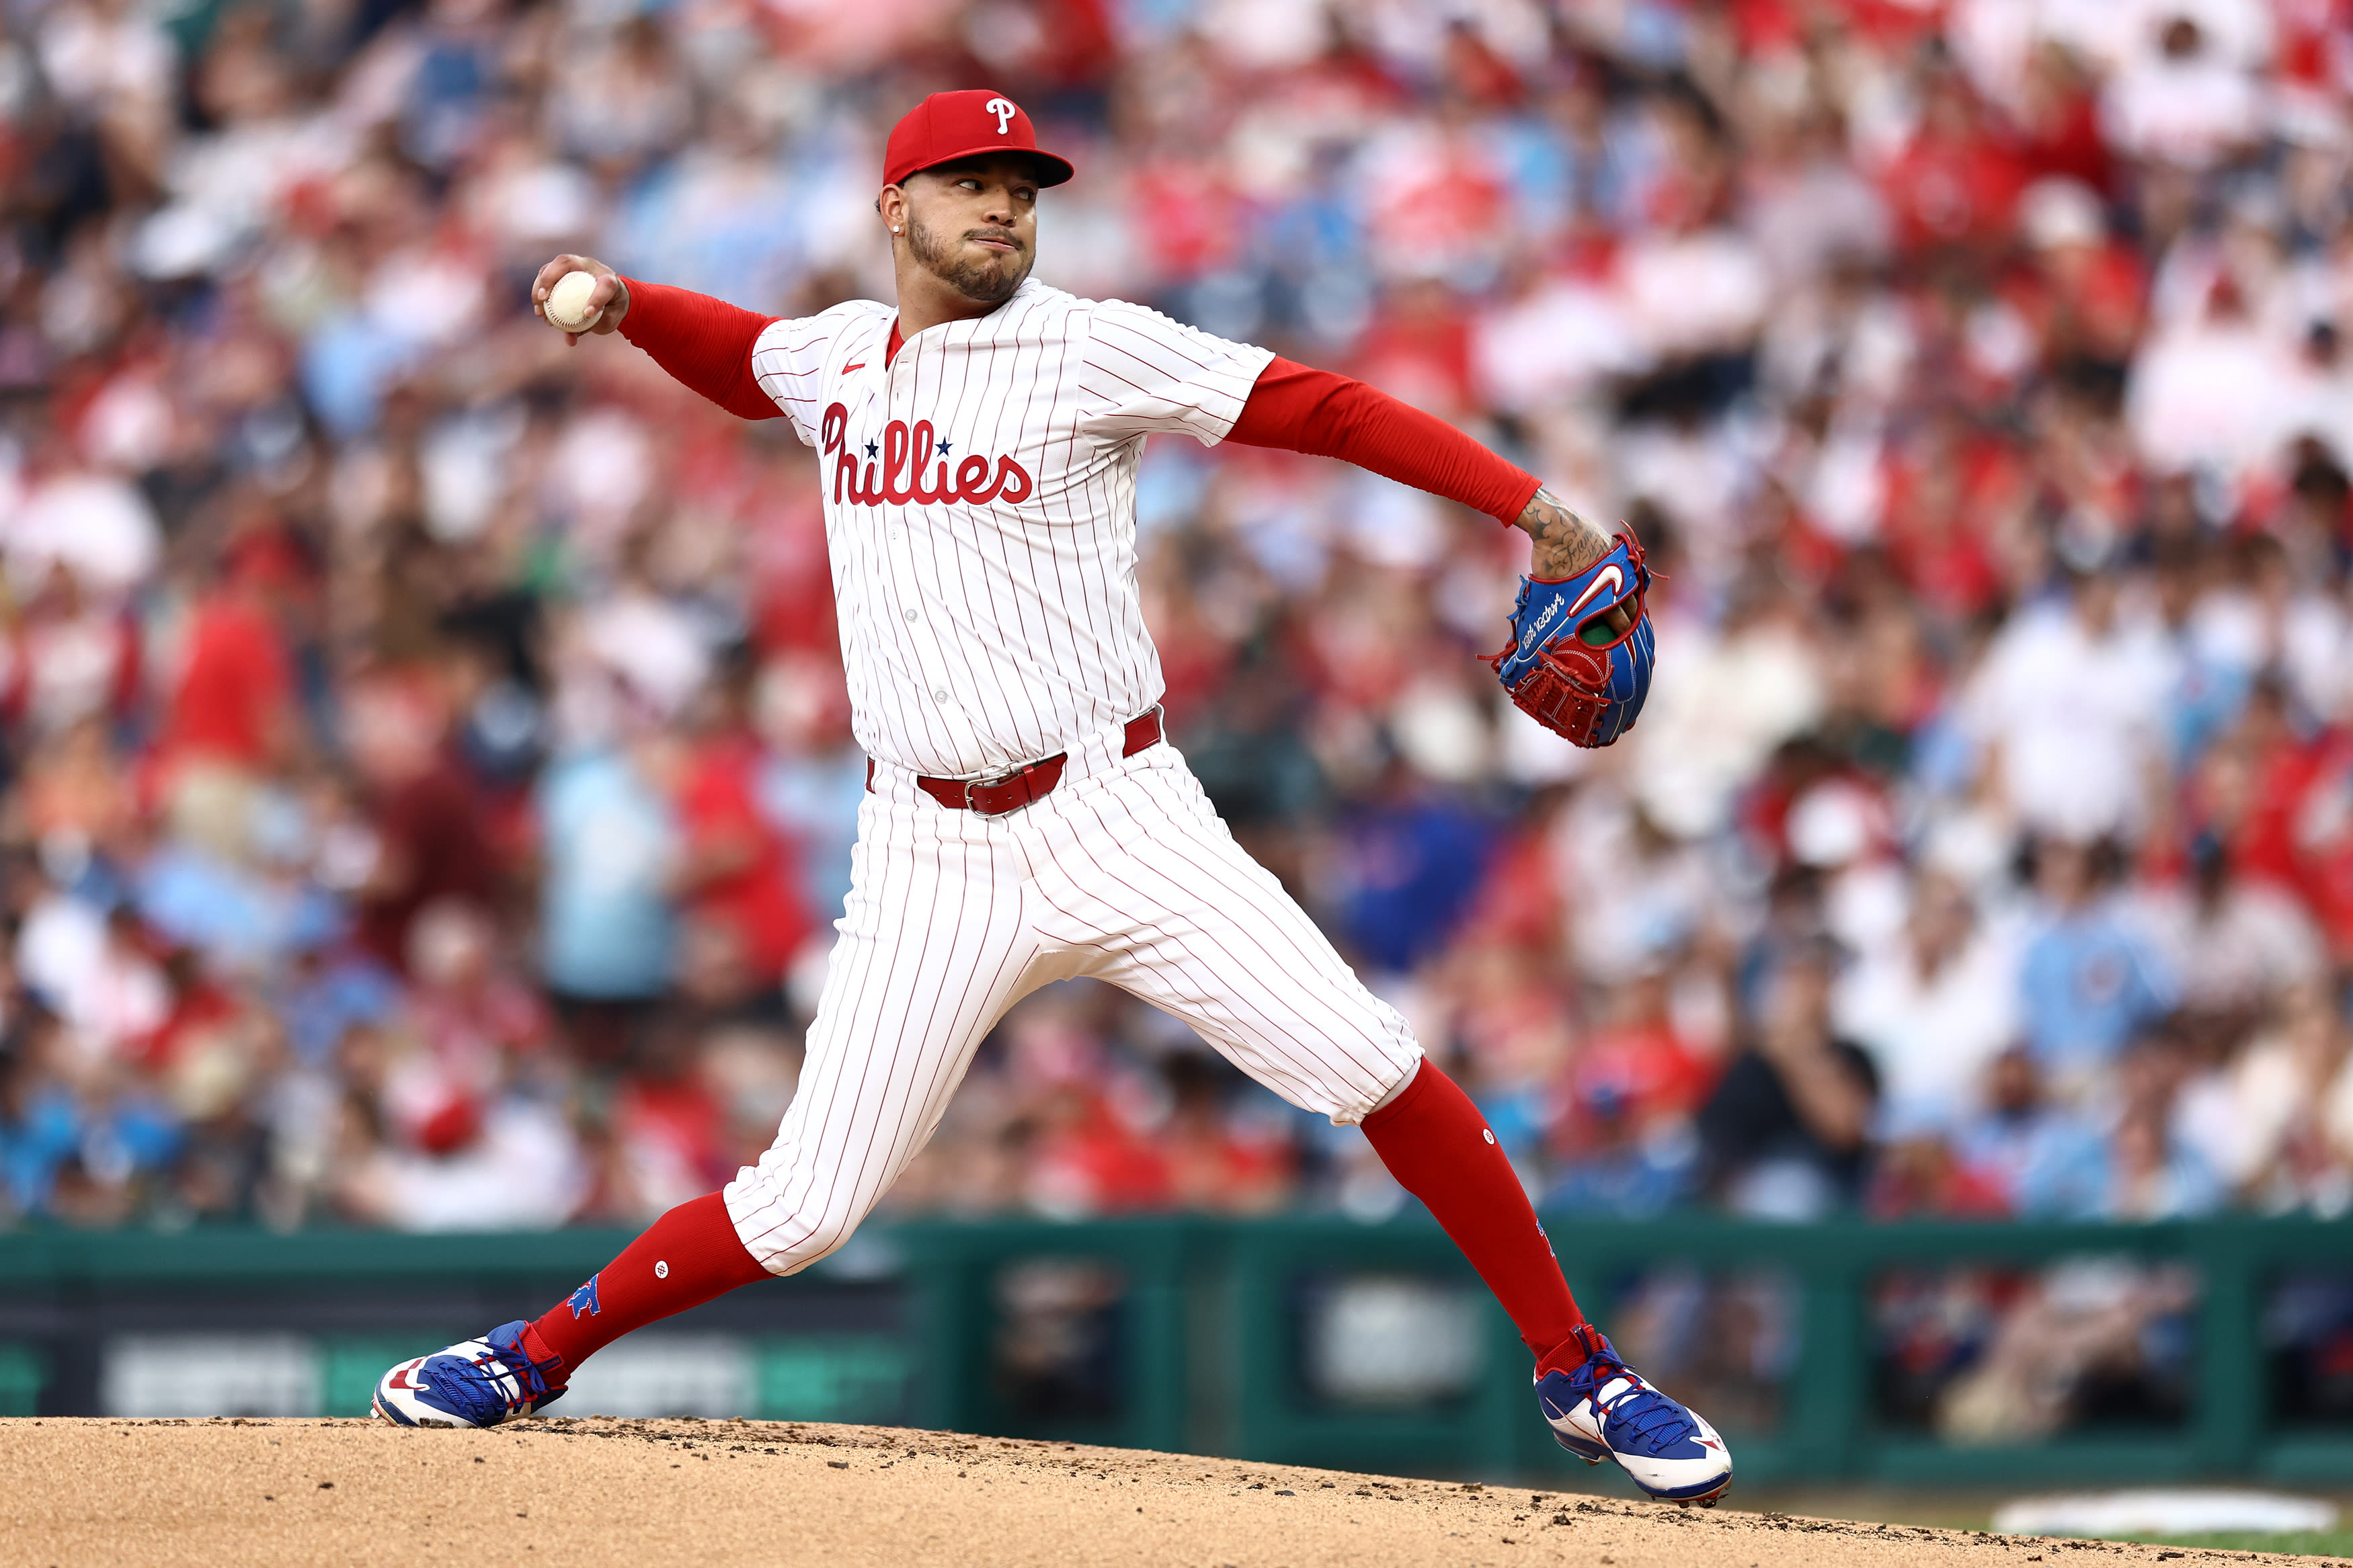 Phillies offense continues to have Taijuan Walker's back whenever he takes the mound